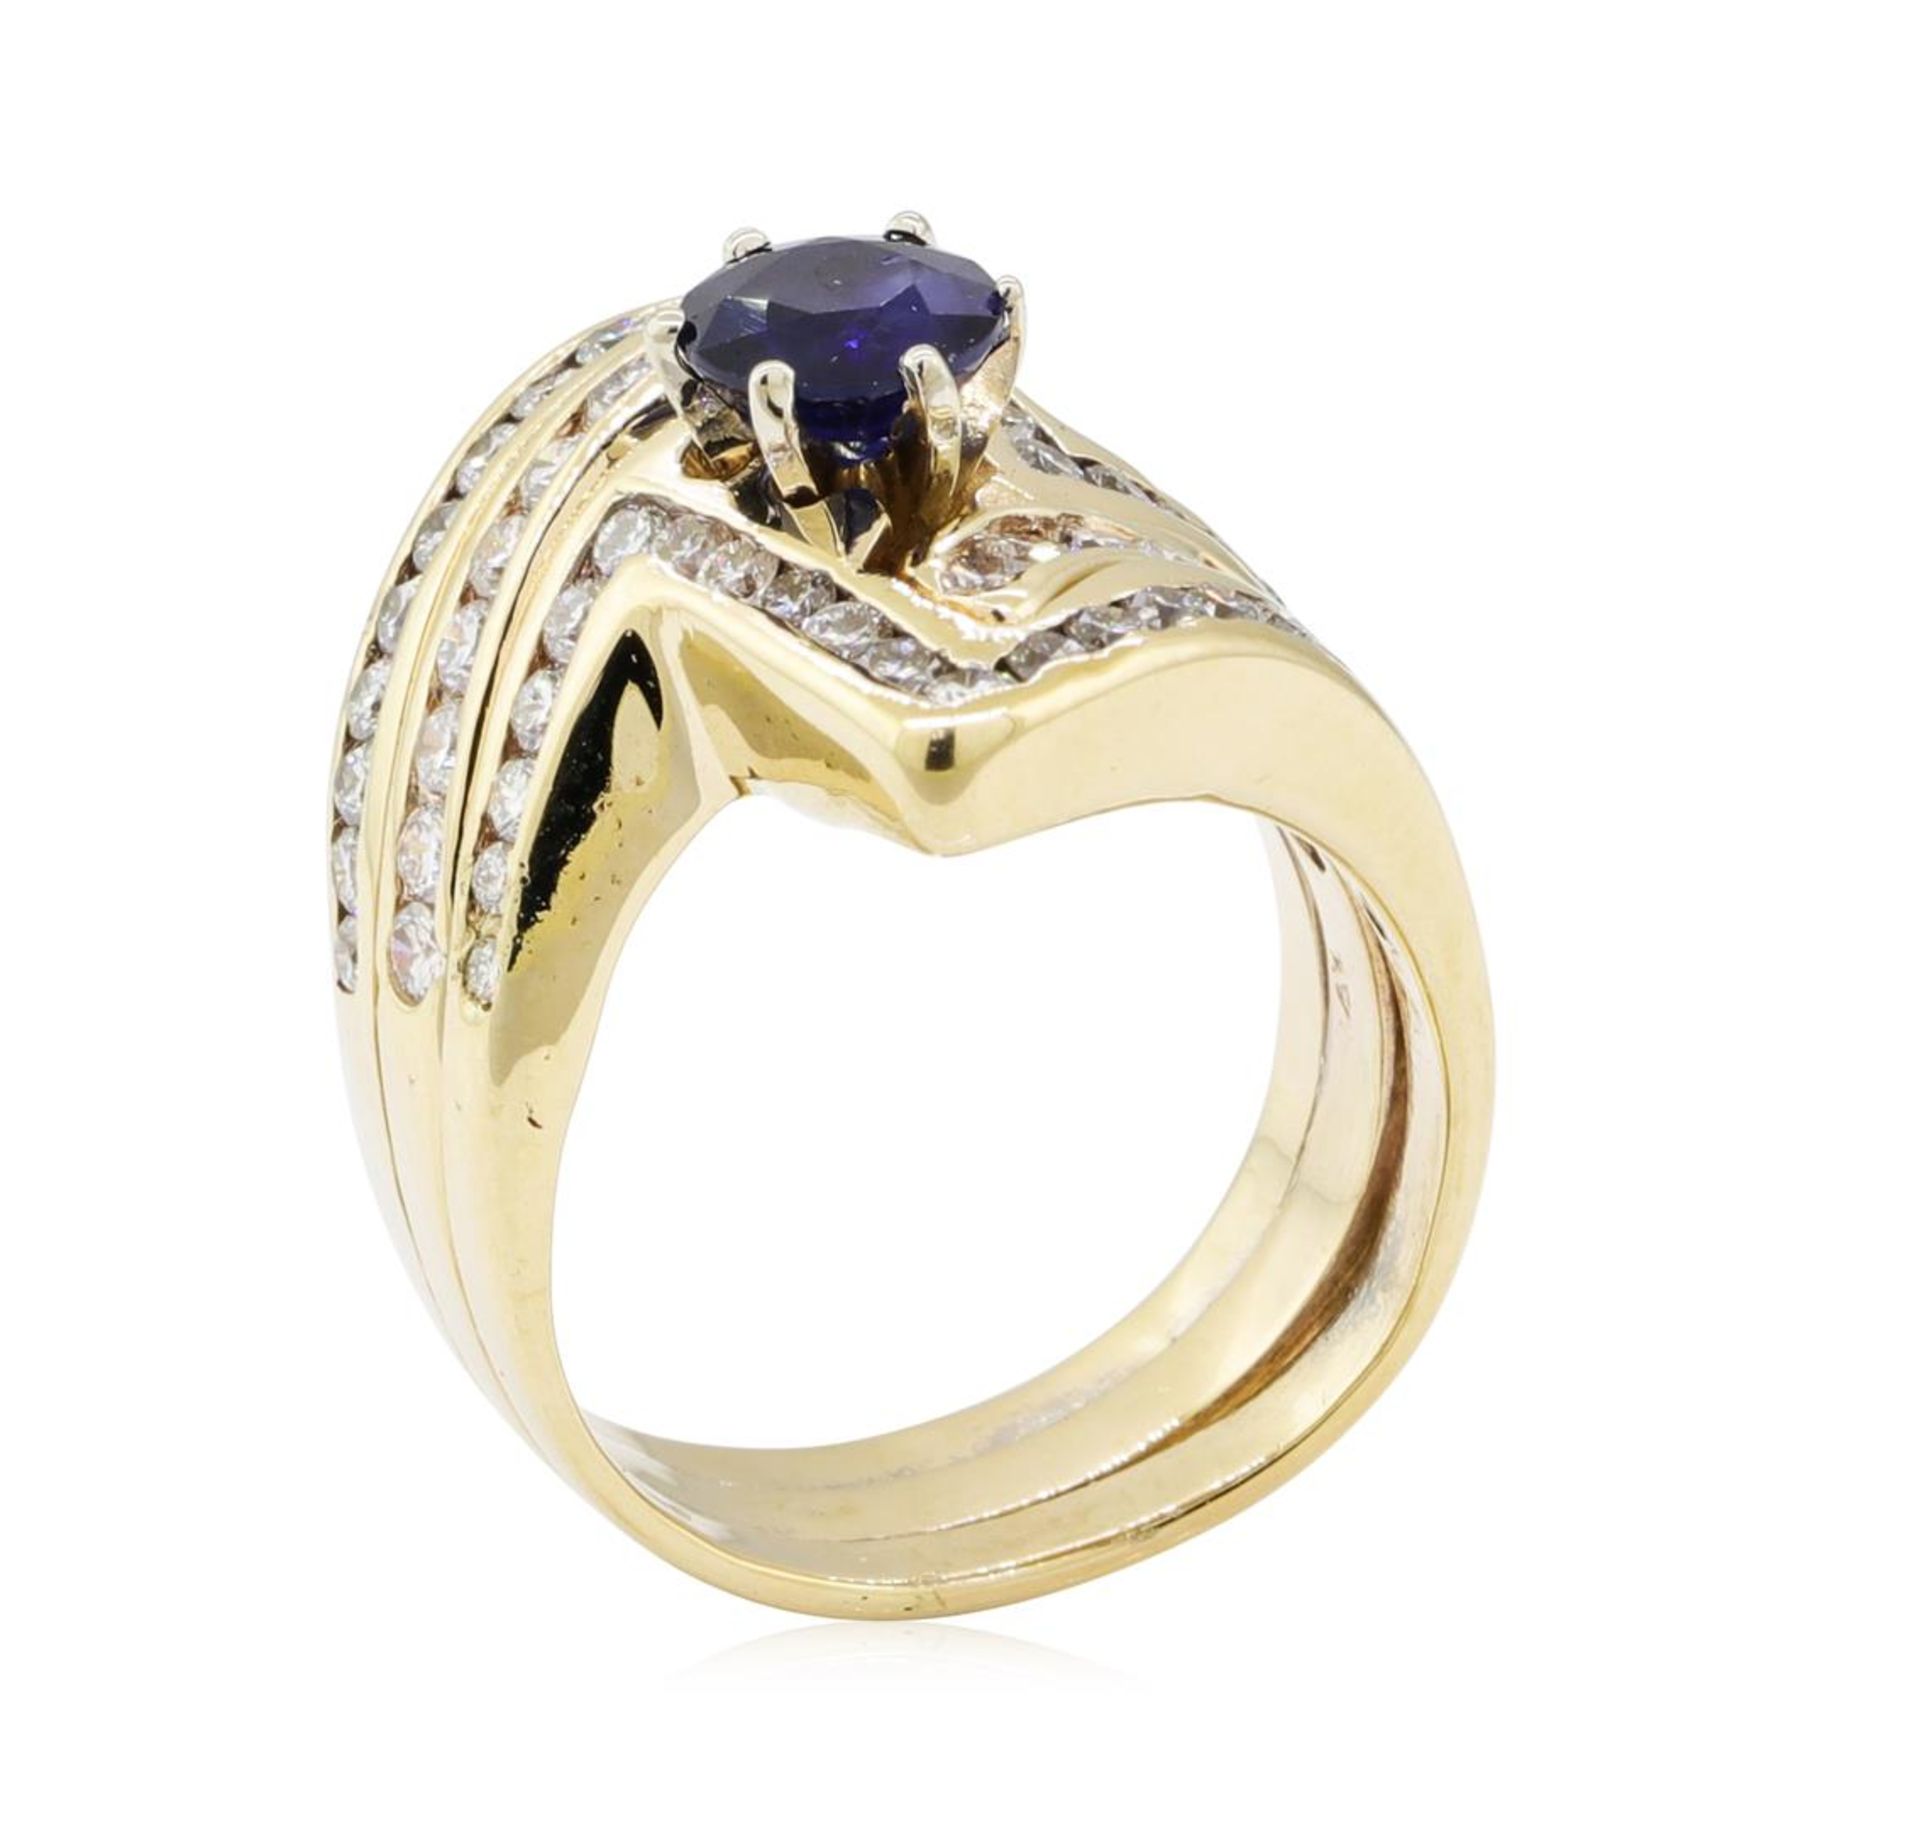 1.97 ctw Sapphire and Diamond Ring - 14KT Yellow Gold - Image 4 of 5